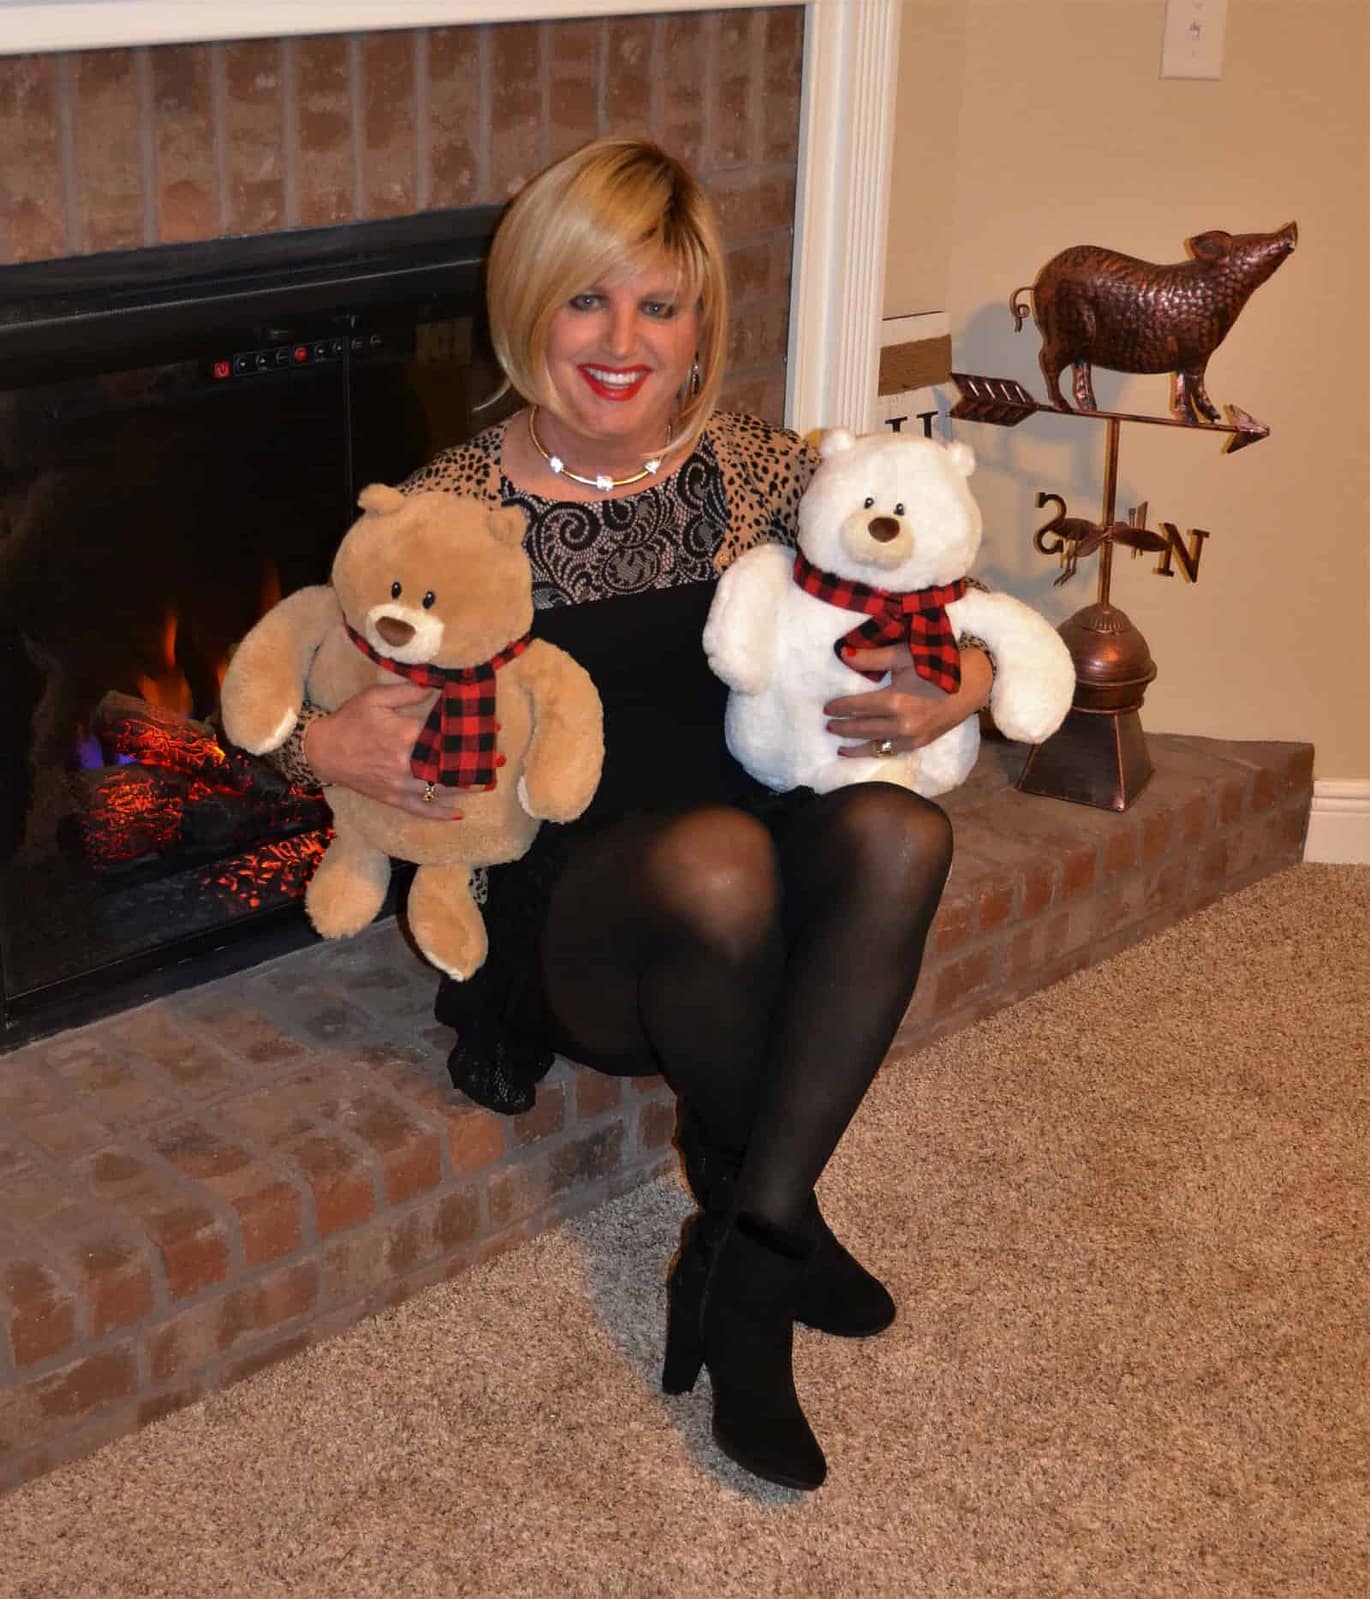 Me And My Two Teddies!